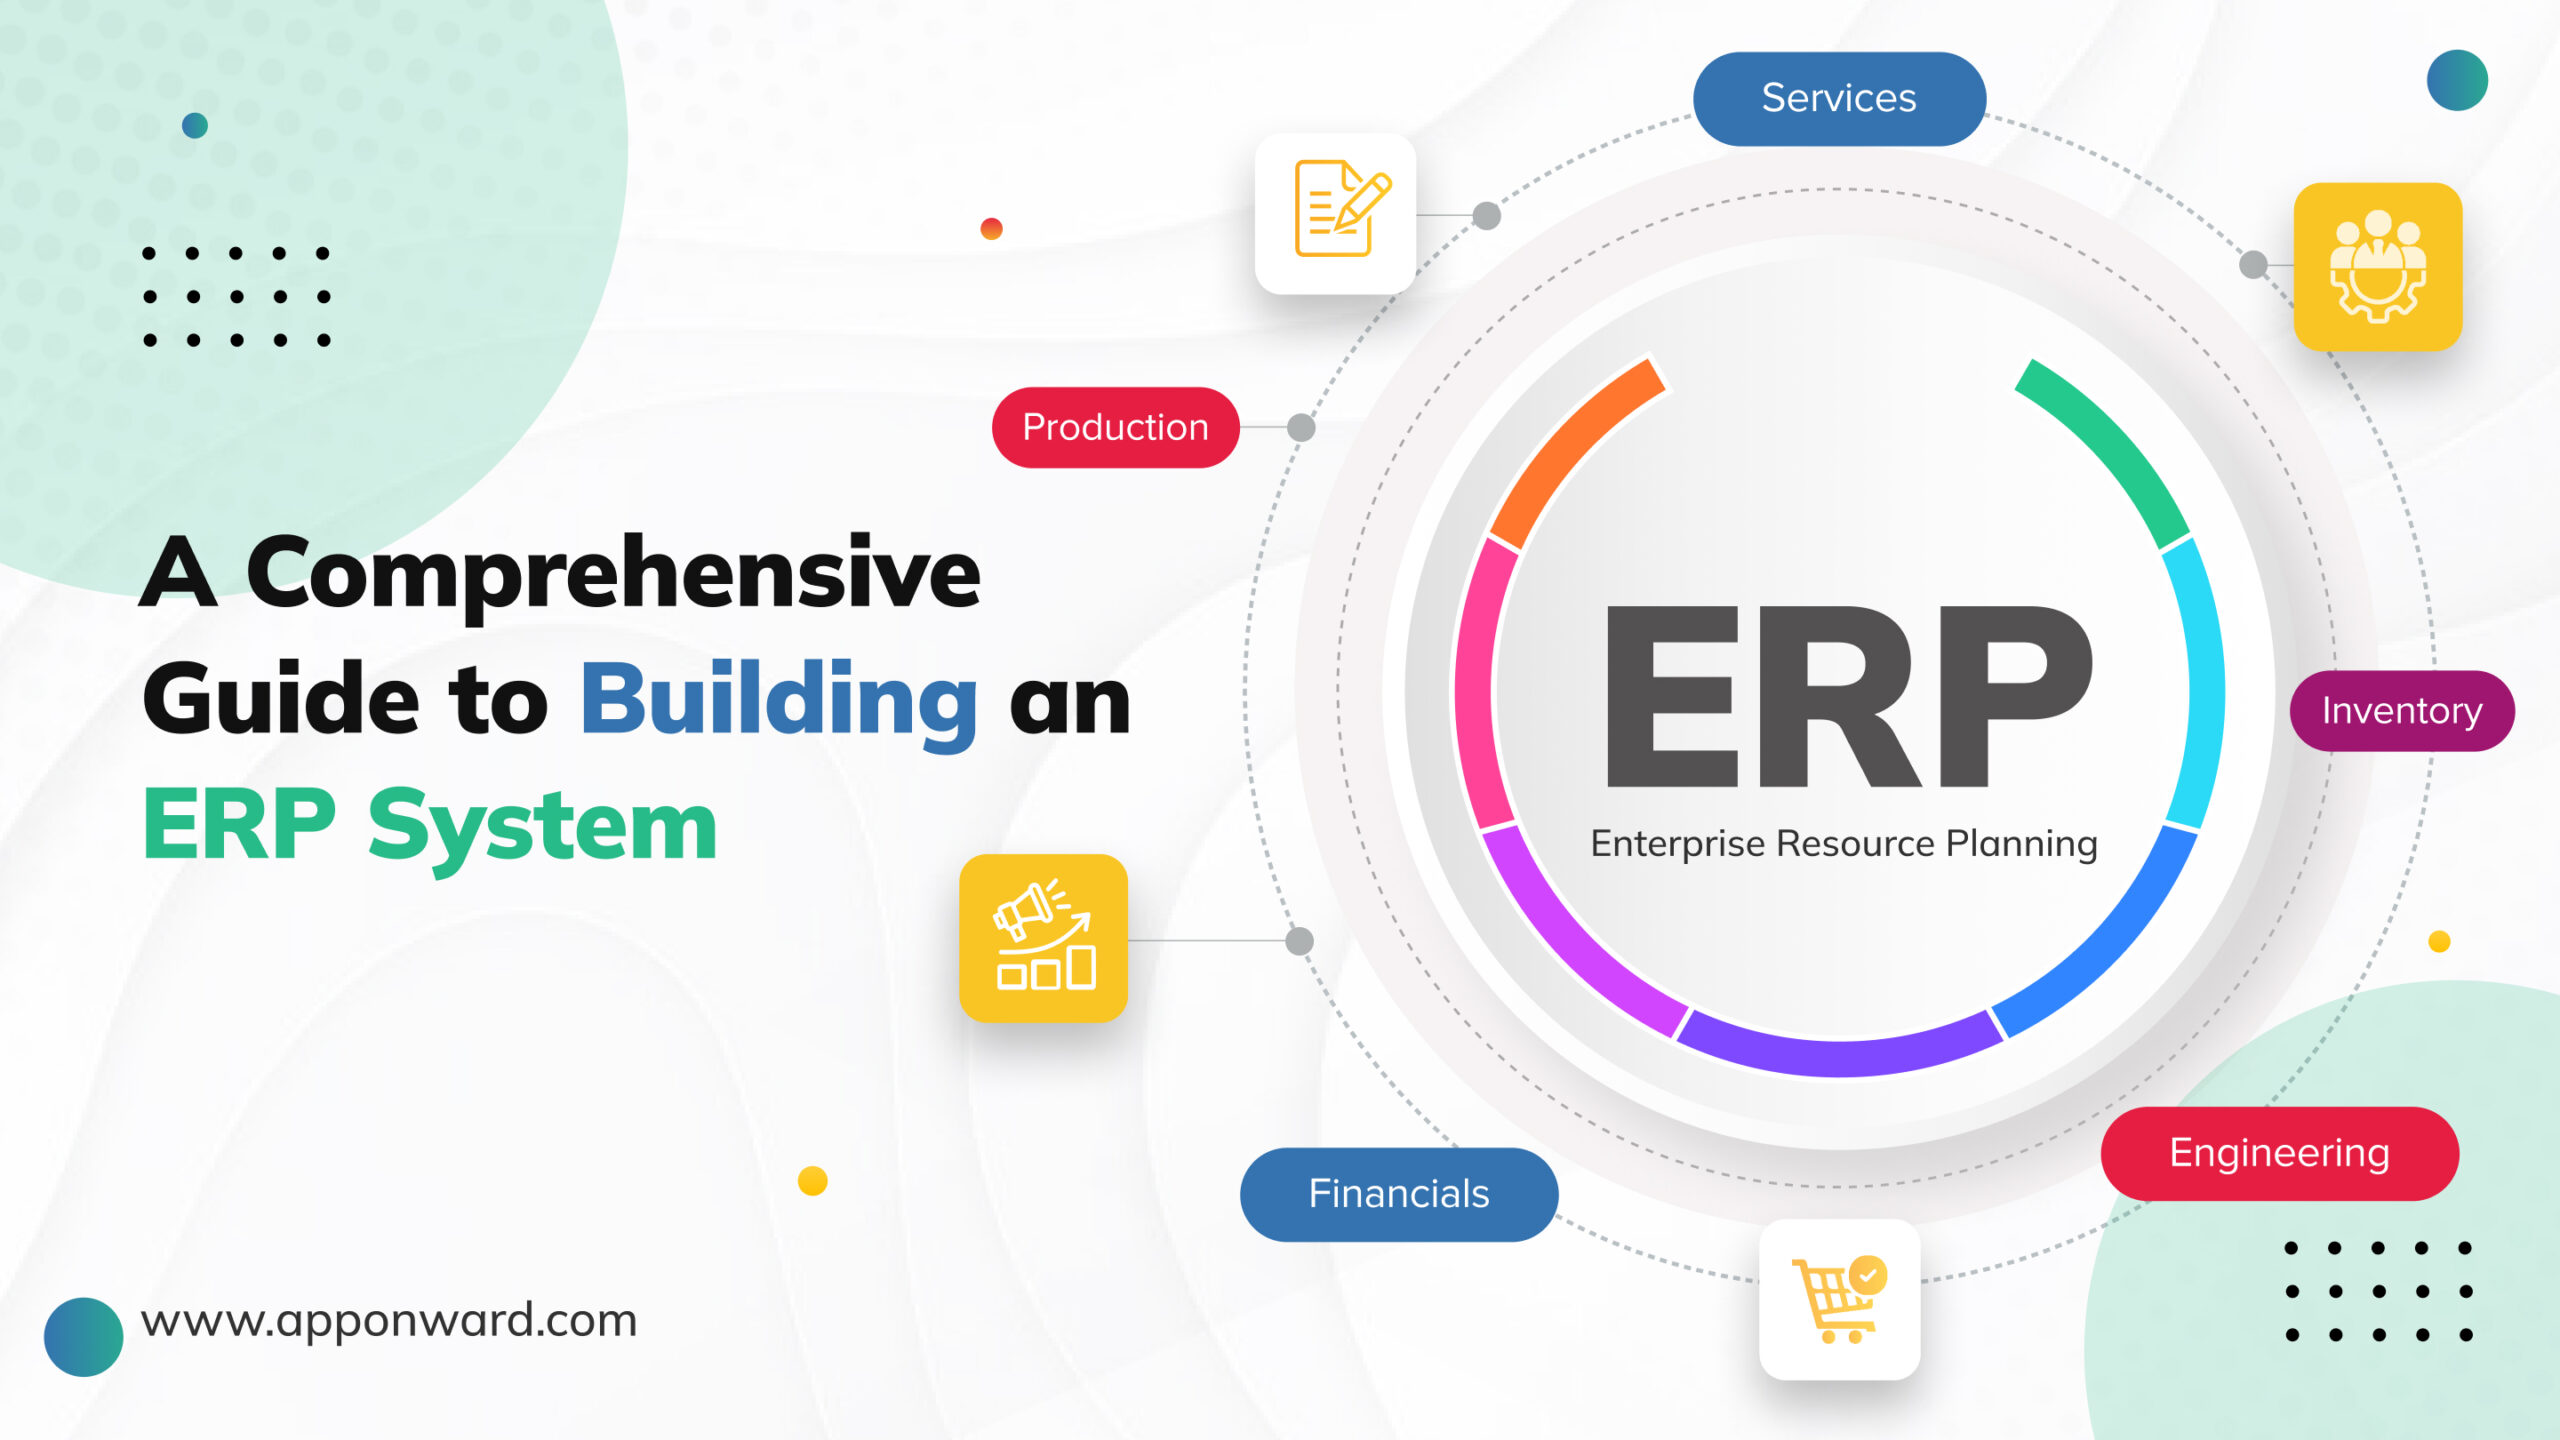 This image contains the heading "A comprehensive guide to building an ERP system" on the left side and on the right side it has a circular diagram containing all the fields an ERP system can be built for.